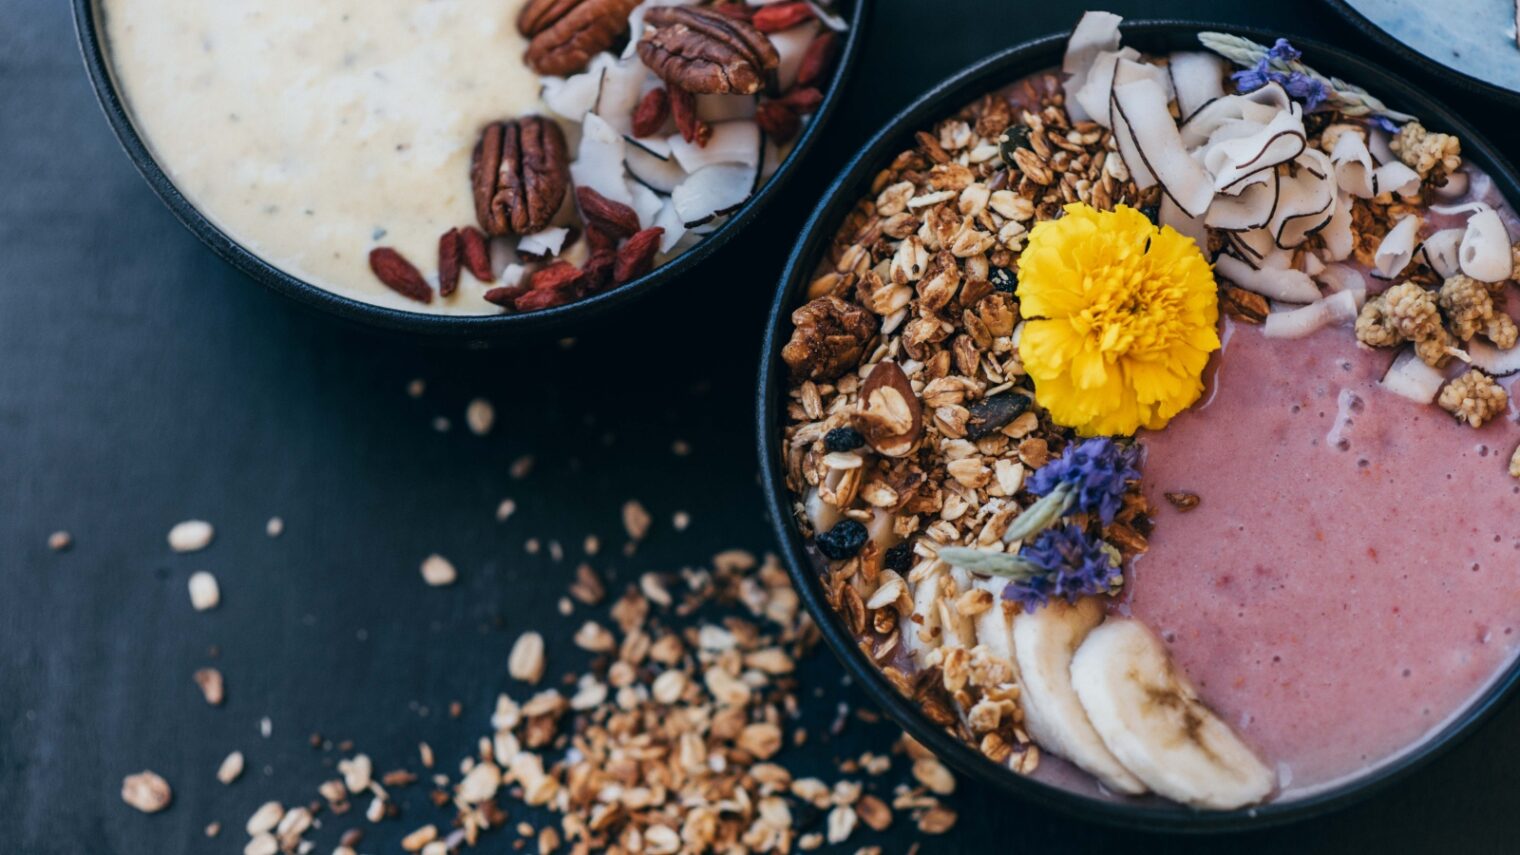 Smoothie bowls with homemade granola are one of the special dishes at Tel Aviv vegan café Anastasia. Photo by Or Kaplan